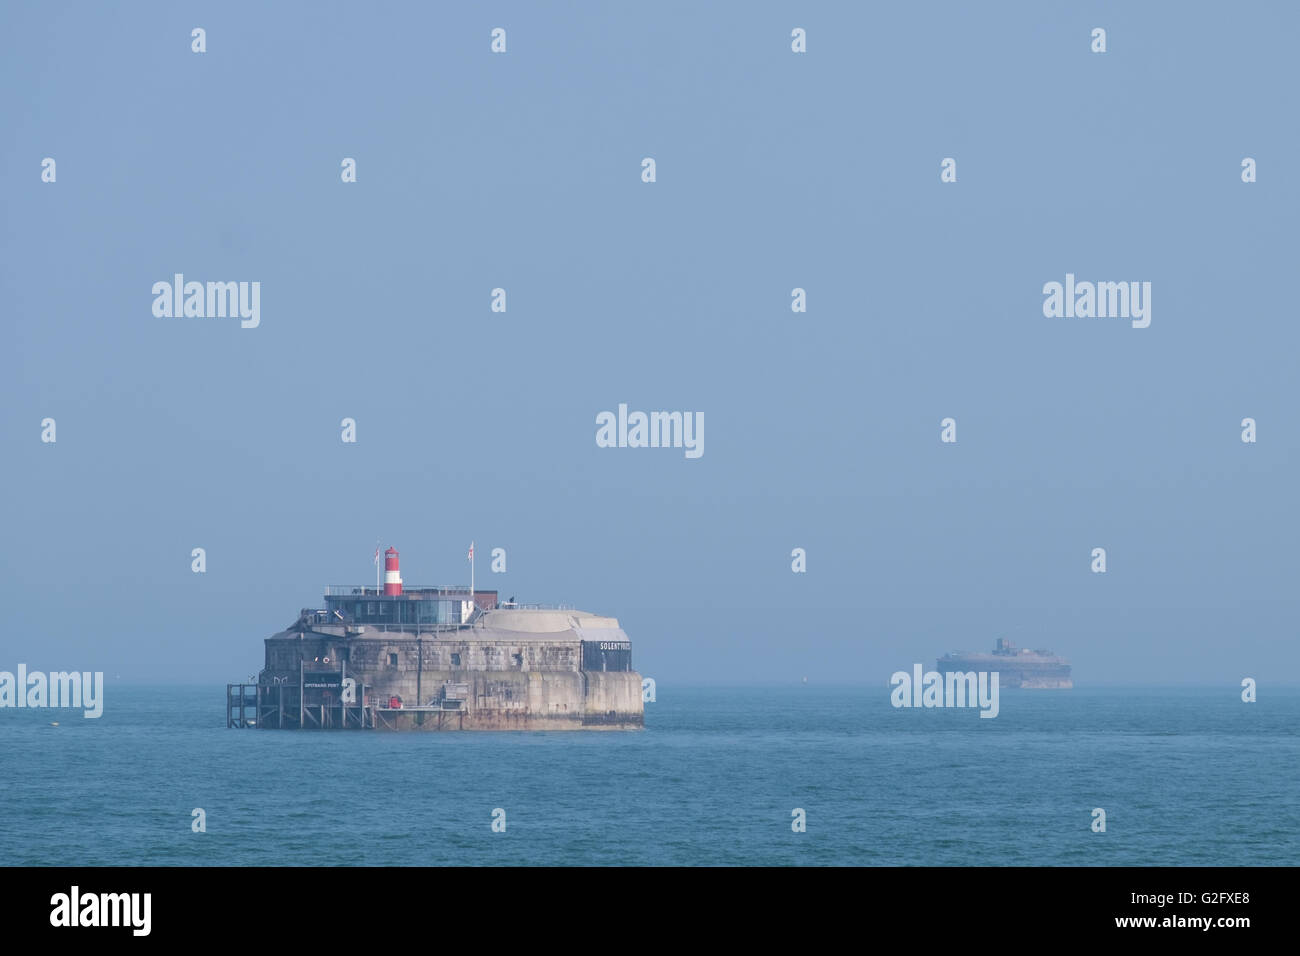 Solent Forts, Spitbank Fort (left) and Horseshoe Fort (right) on a warm, clear and calm day in the Solent. Stock Photo